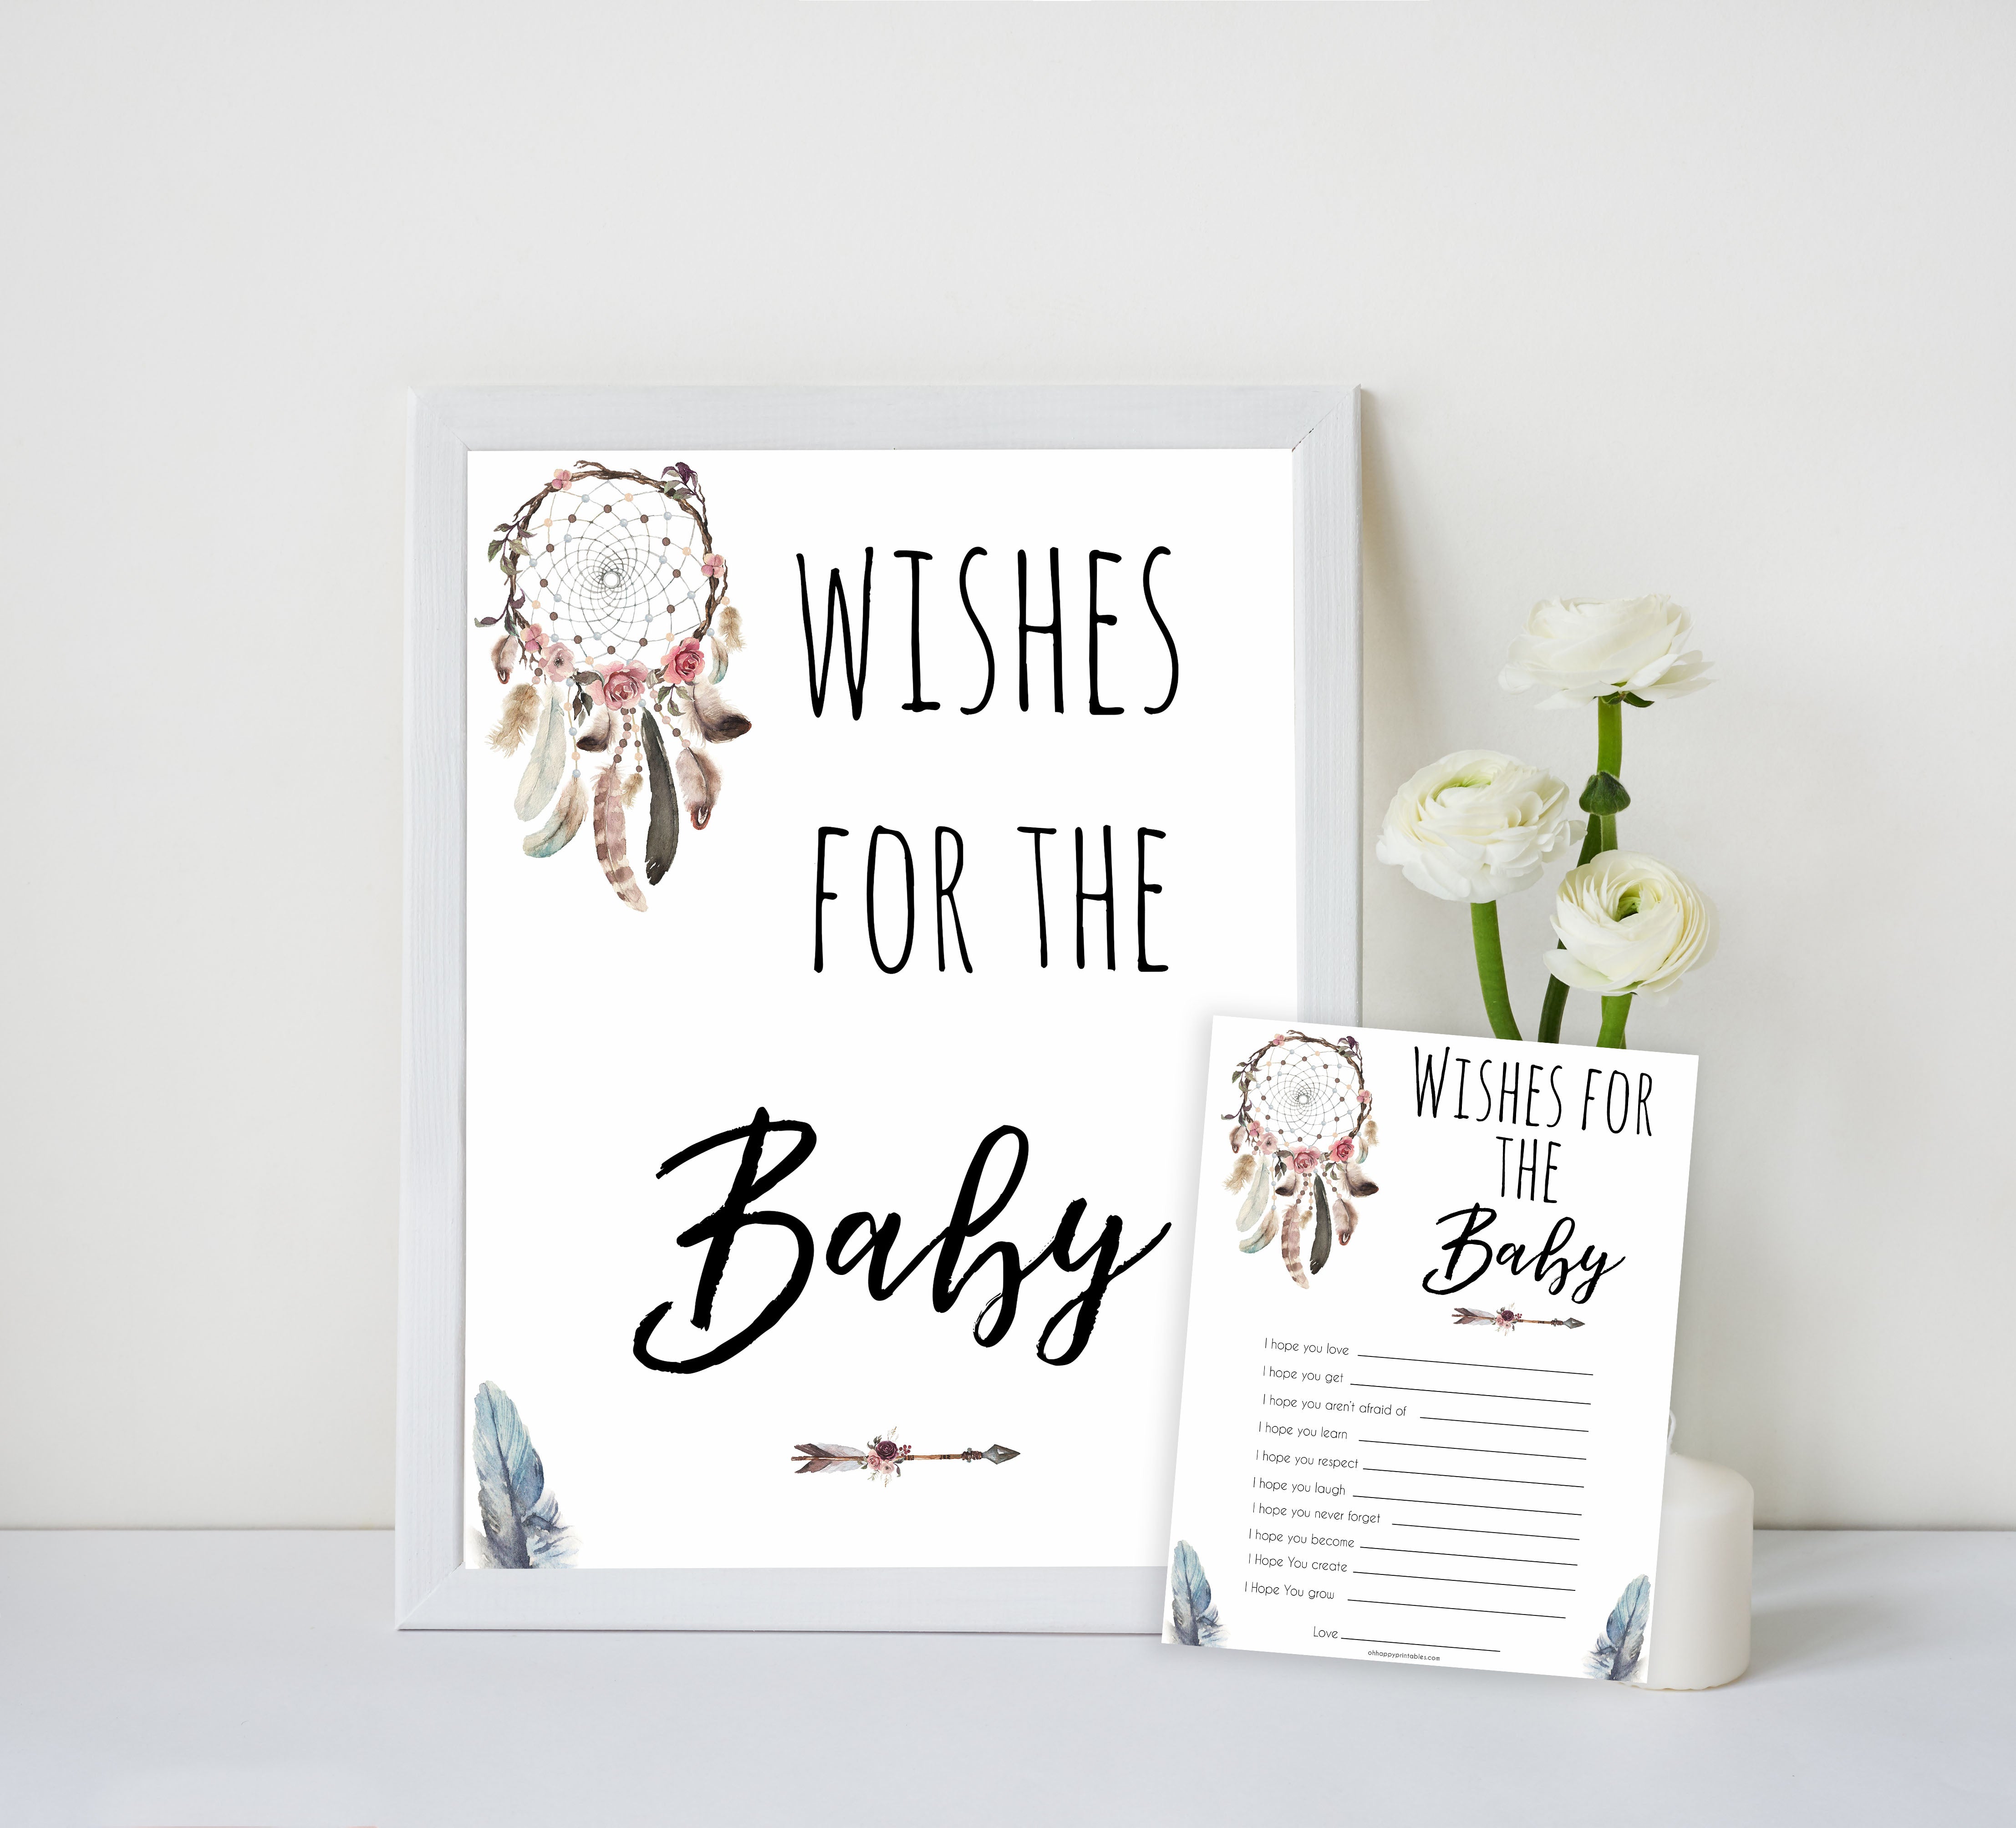 Boho baby games, wishes for the baby baby game, fun baby games, printable baby games, top 10 baby games, boho baby shower, baby games, hilarious baby games